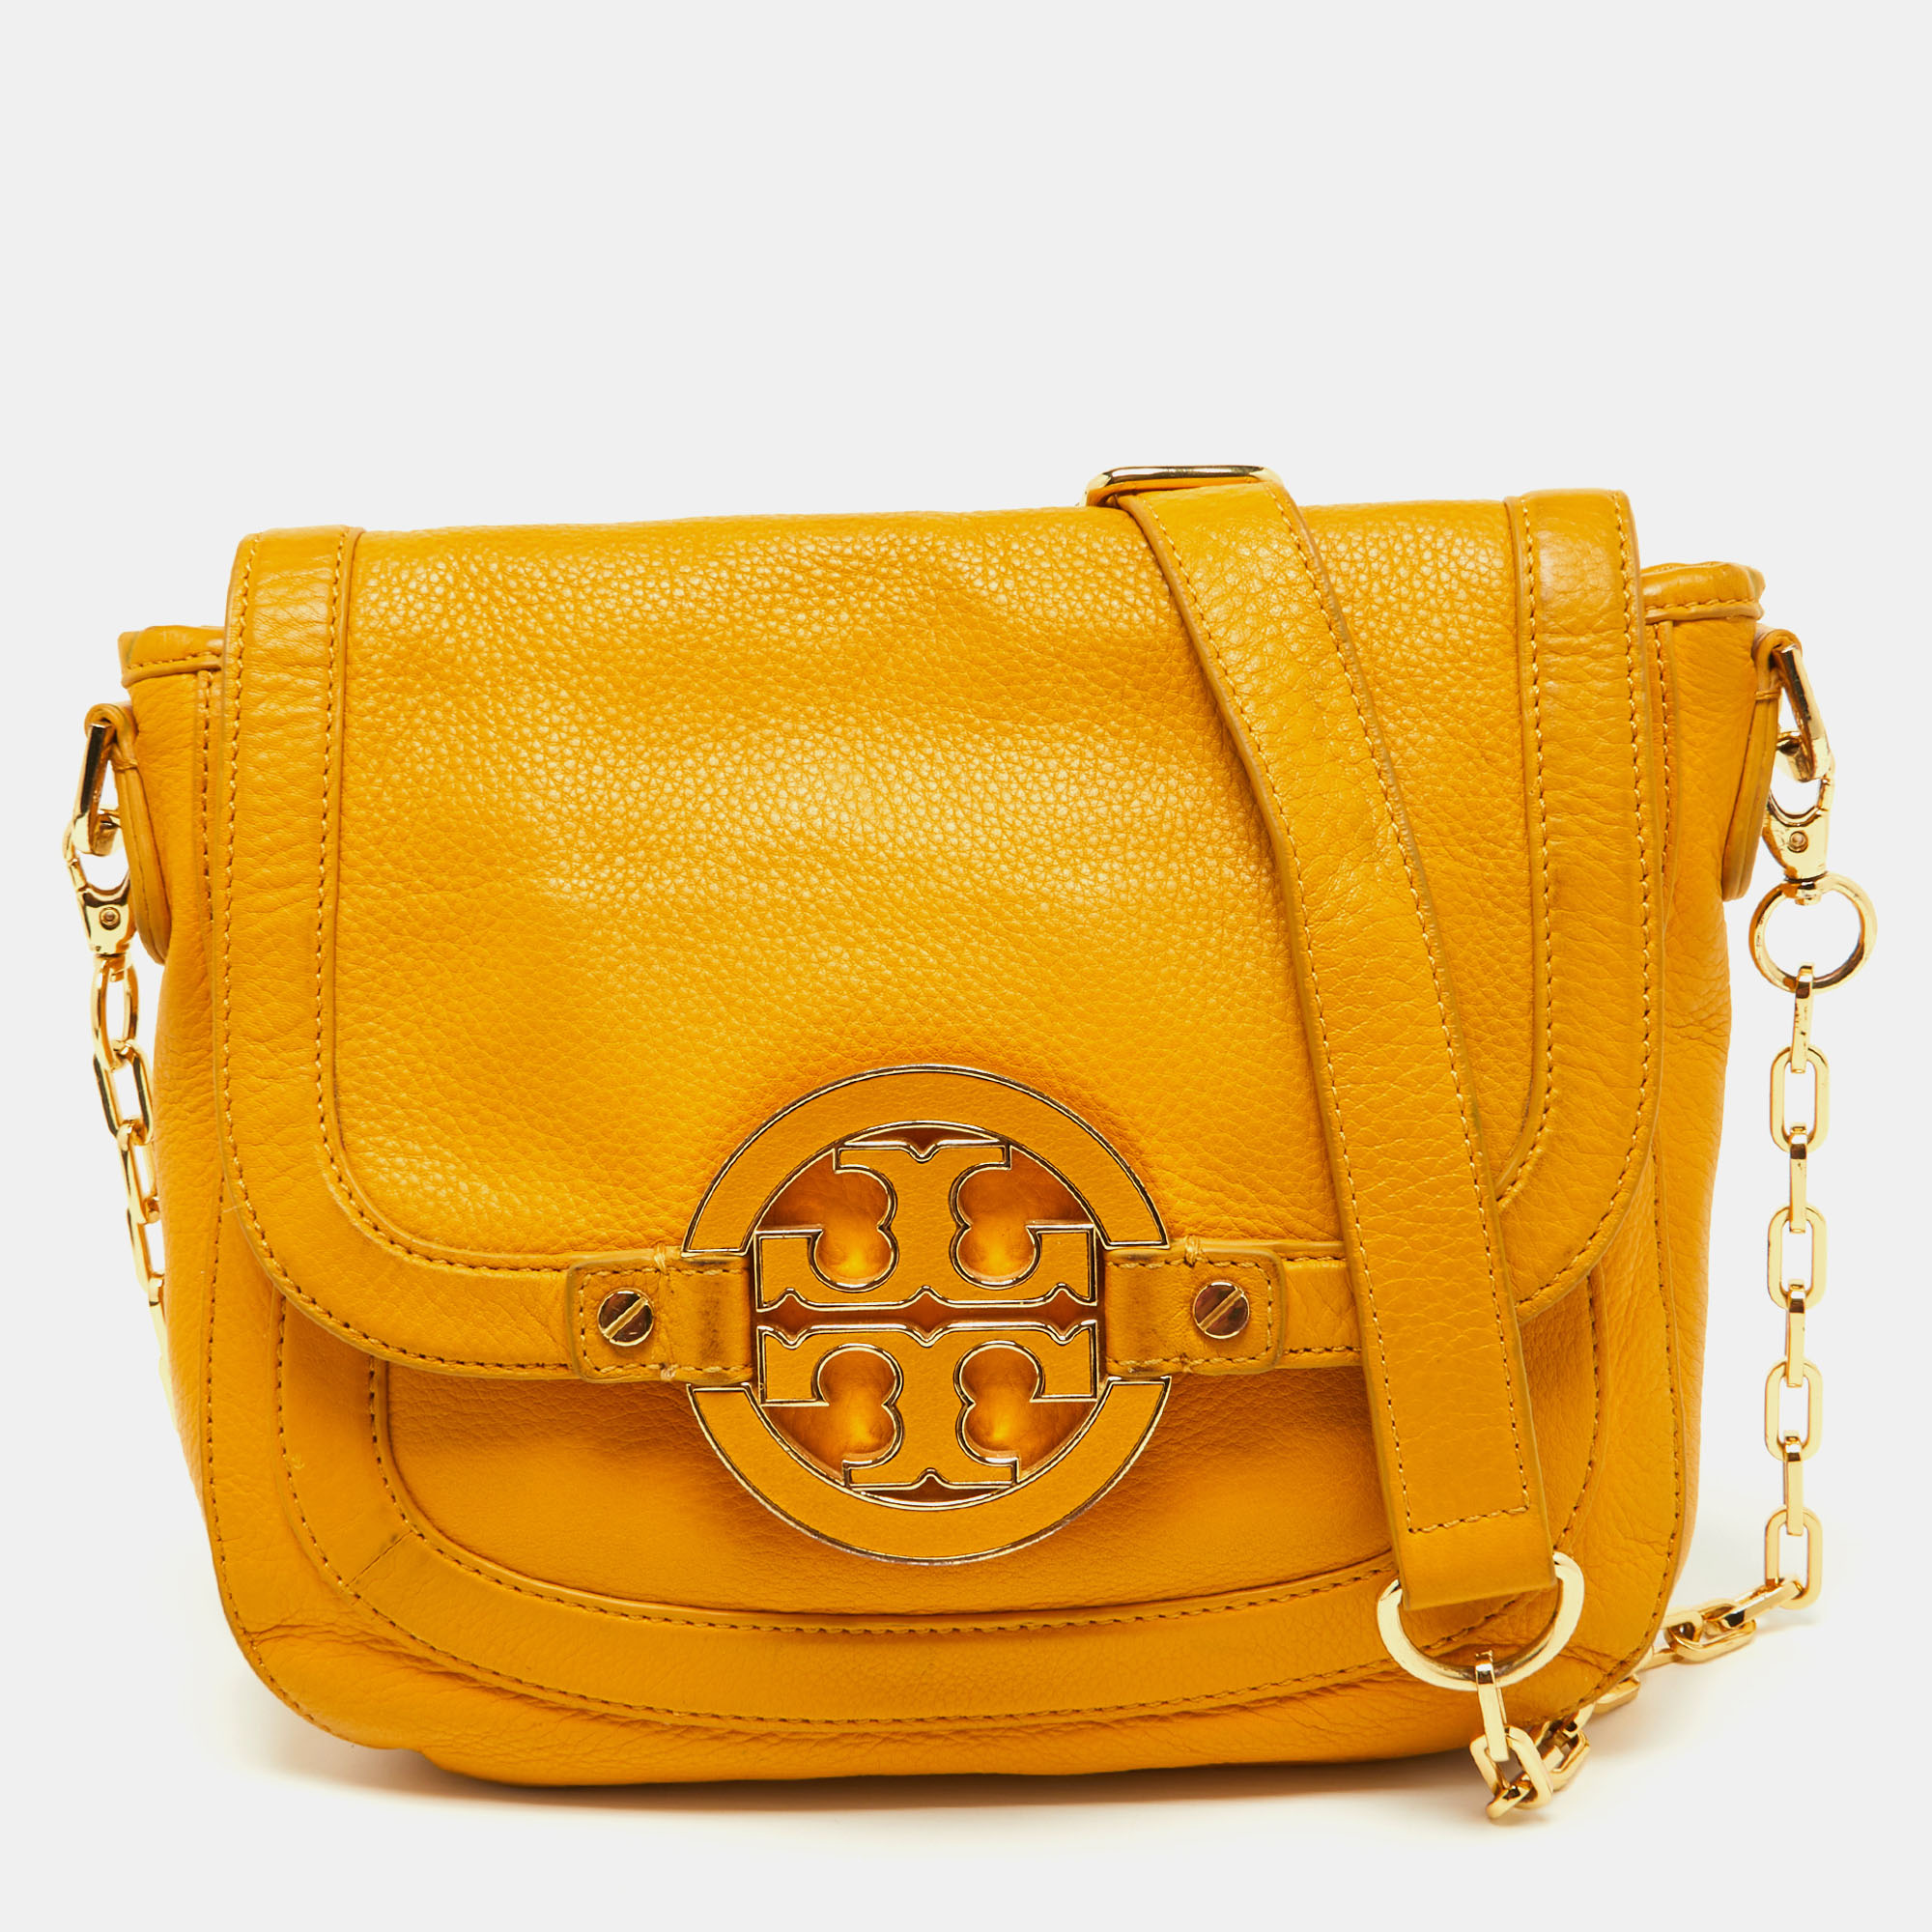 Swap that regular everyday tote with this charming shoulder bag from the house of Tory Burch. Sewn and assembled with care and love the bag promises to boost your style and hold your daily essentials with great ease.